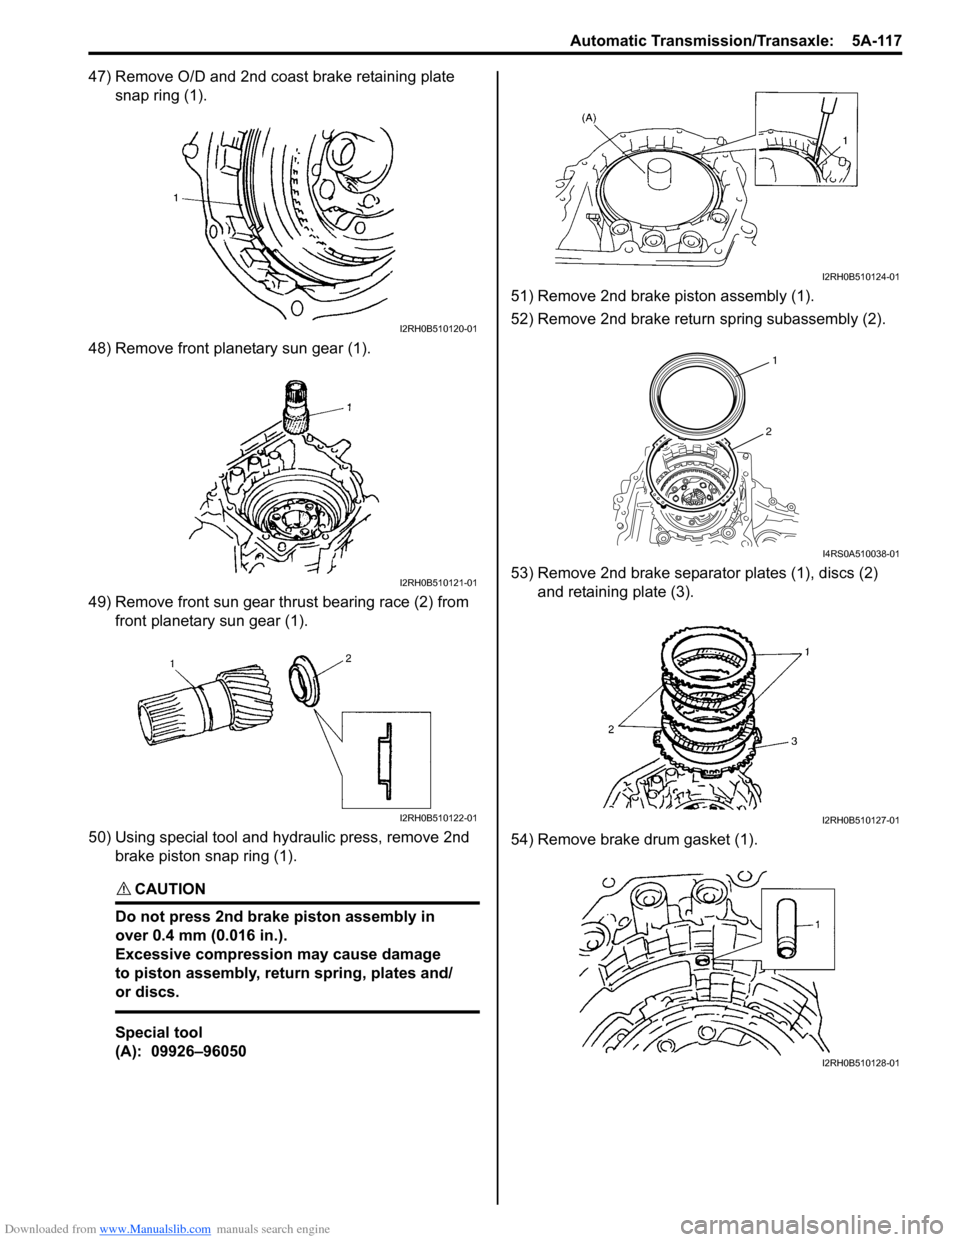 SUZUKI SWIFT 2008 2.G Service Workshop Manual Downloaded from www.Manualslib.com manuals search engine Automatic Transmission/Transaxle:  5A-117
47) Remove O/D and 2nd coast brake retaining plate snap ring (1).
48) Remove front planetary sun gear